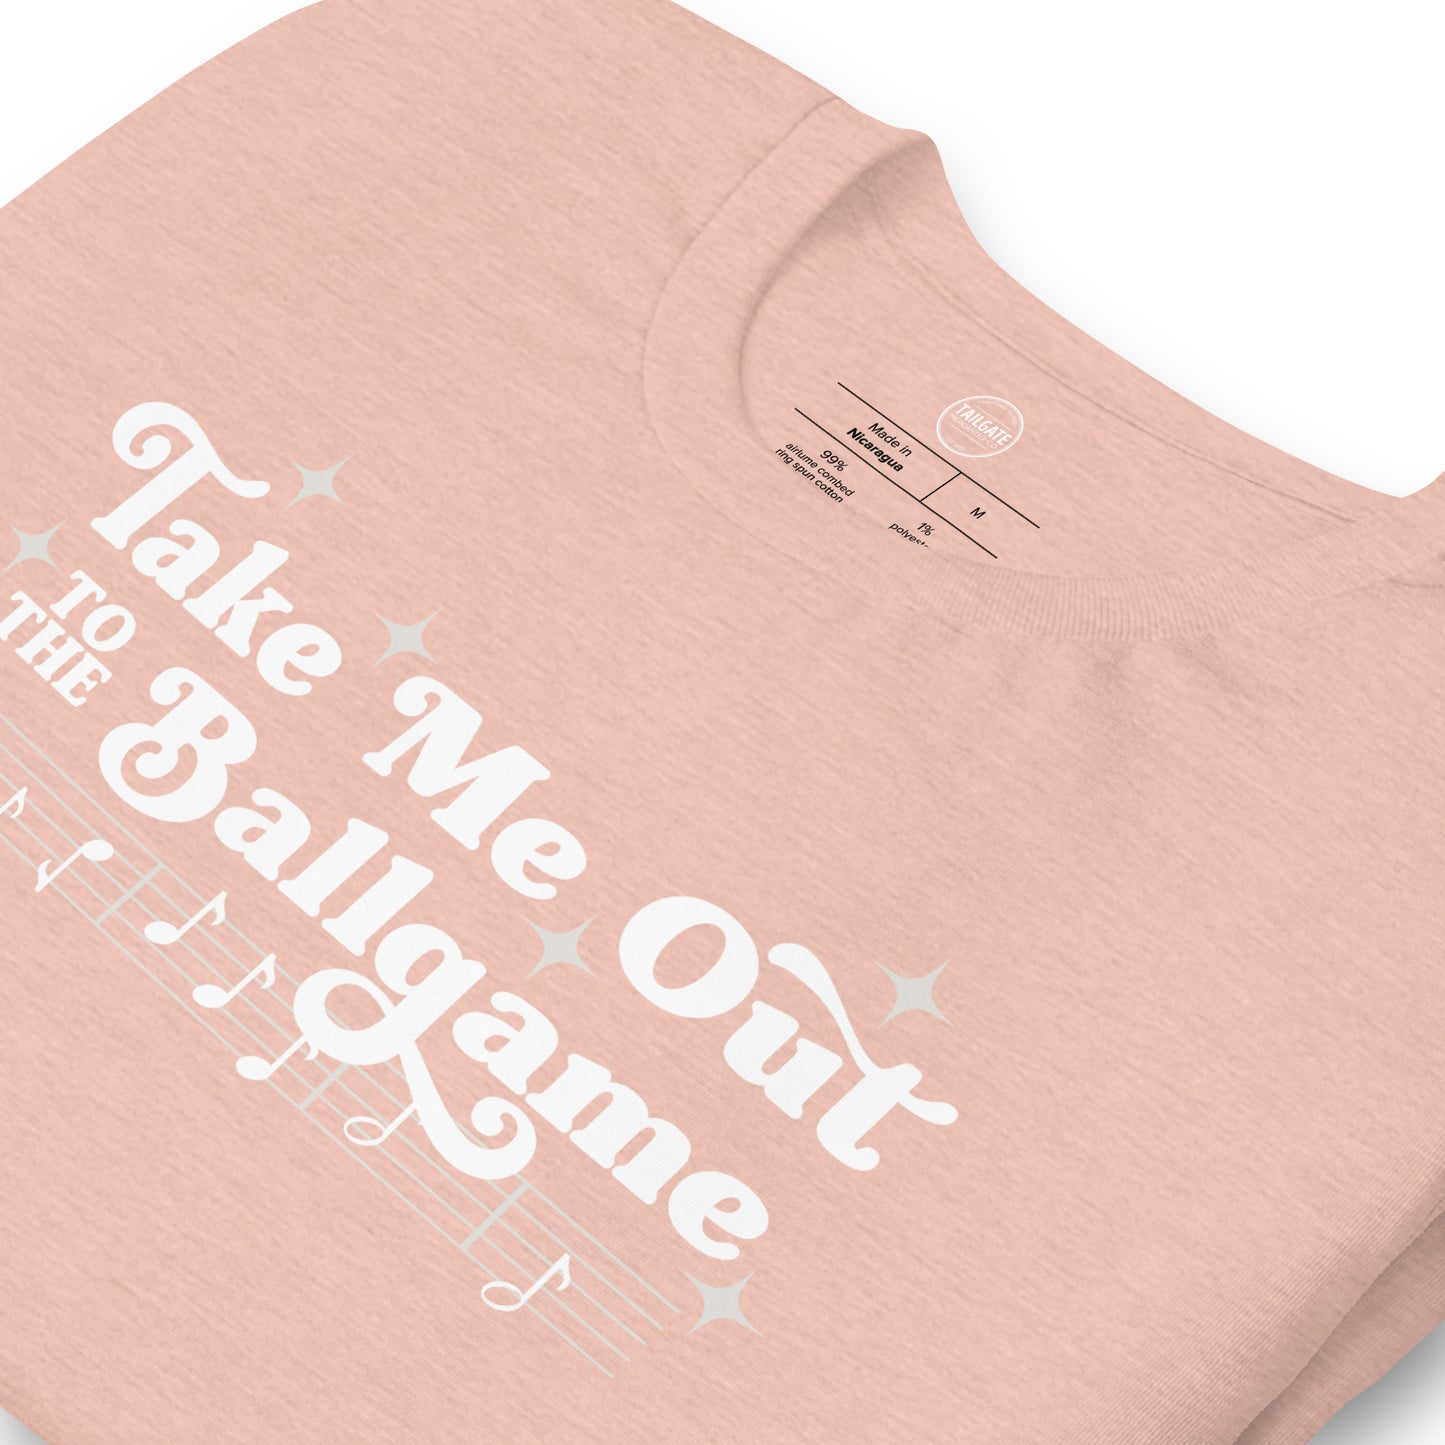 Close up image of heather peach t-shirt with design of "Take Me Out to the Ballgame" with coordinating musical notes in white located on centre chest. This design is exclusive to Tailgate Mercantile and available only online.